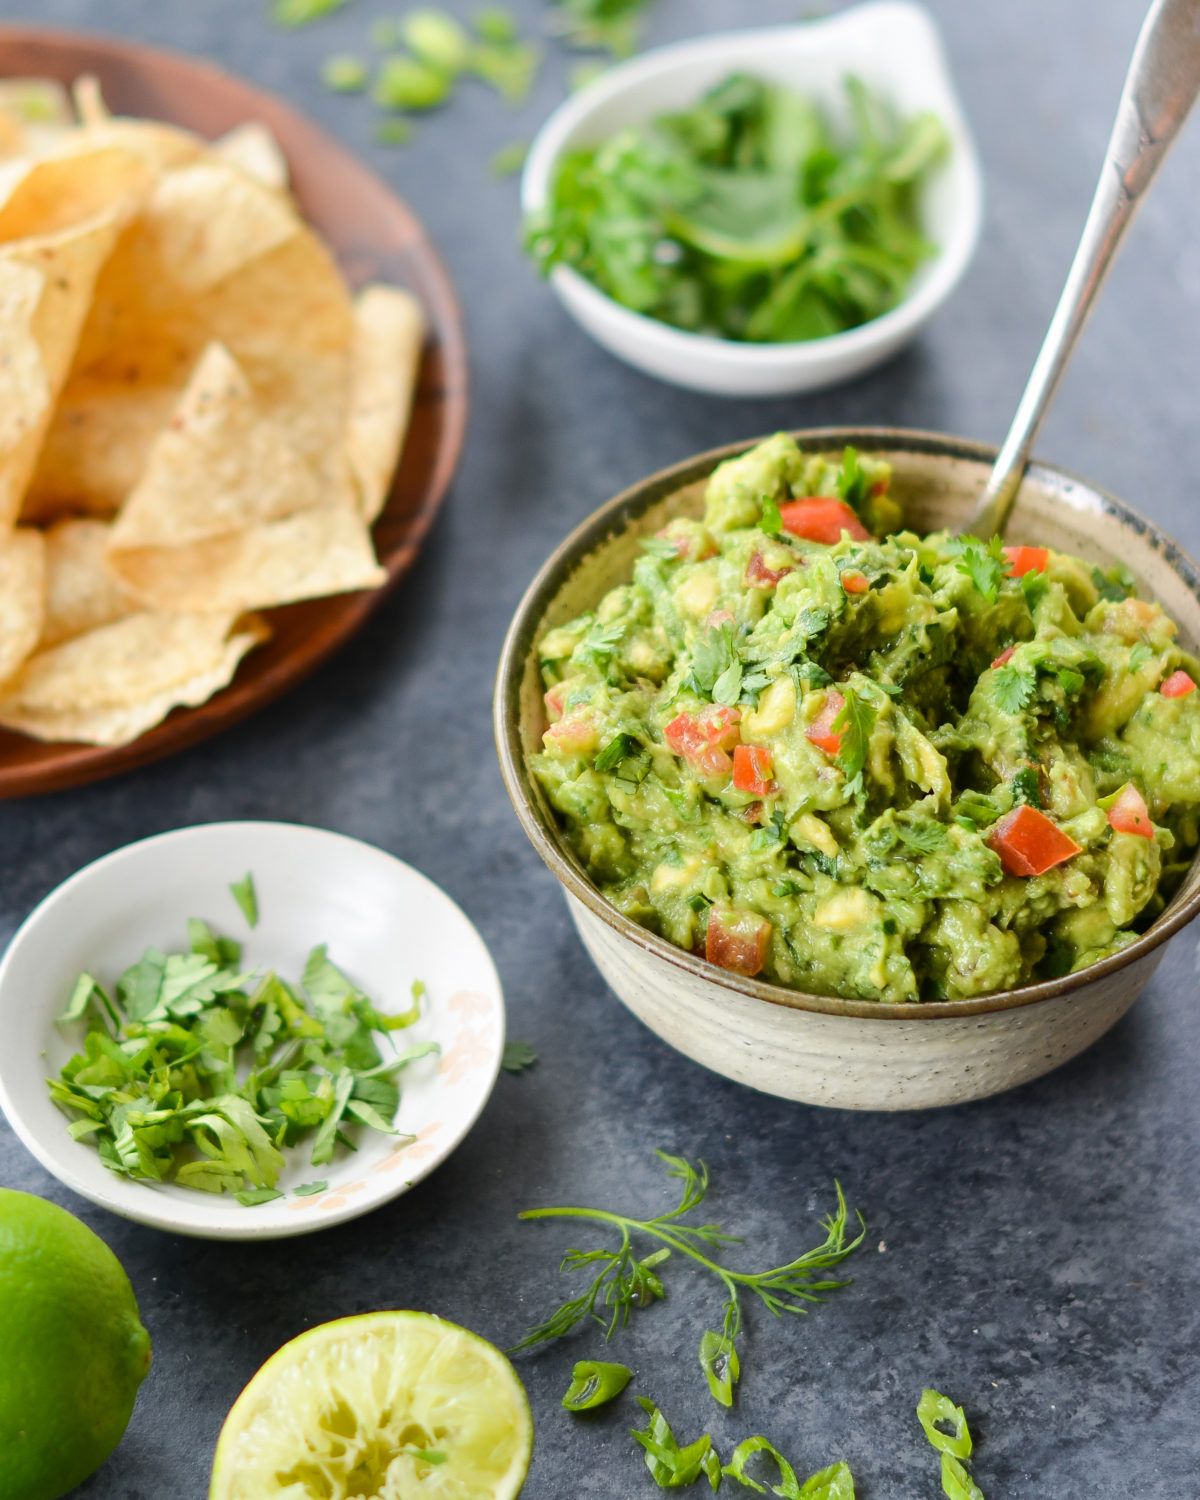 Guacamole Recipe {Step by Step Photos} - Cooking Classy